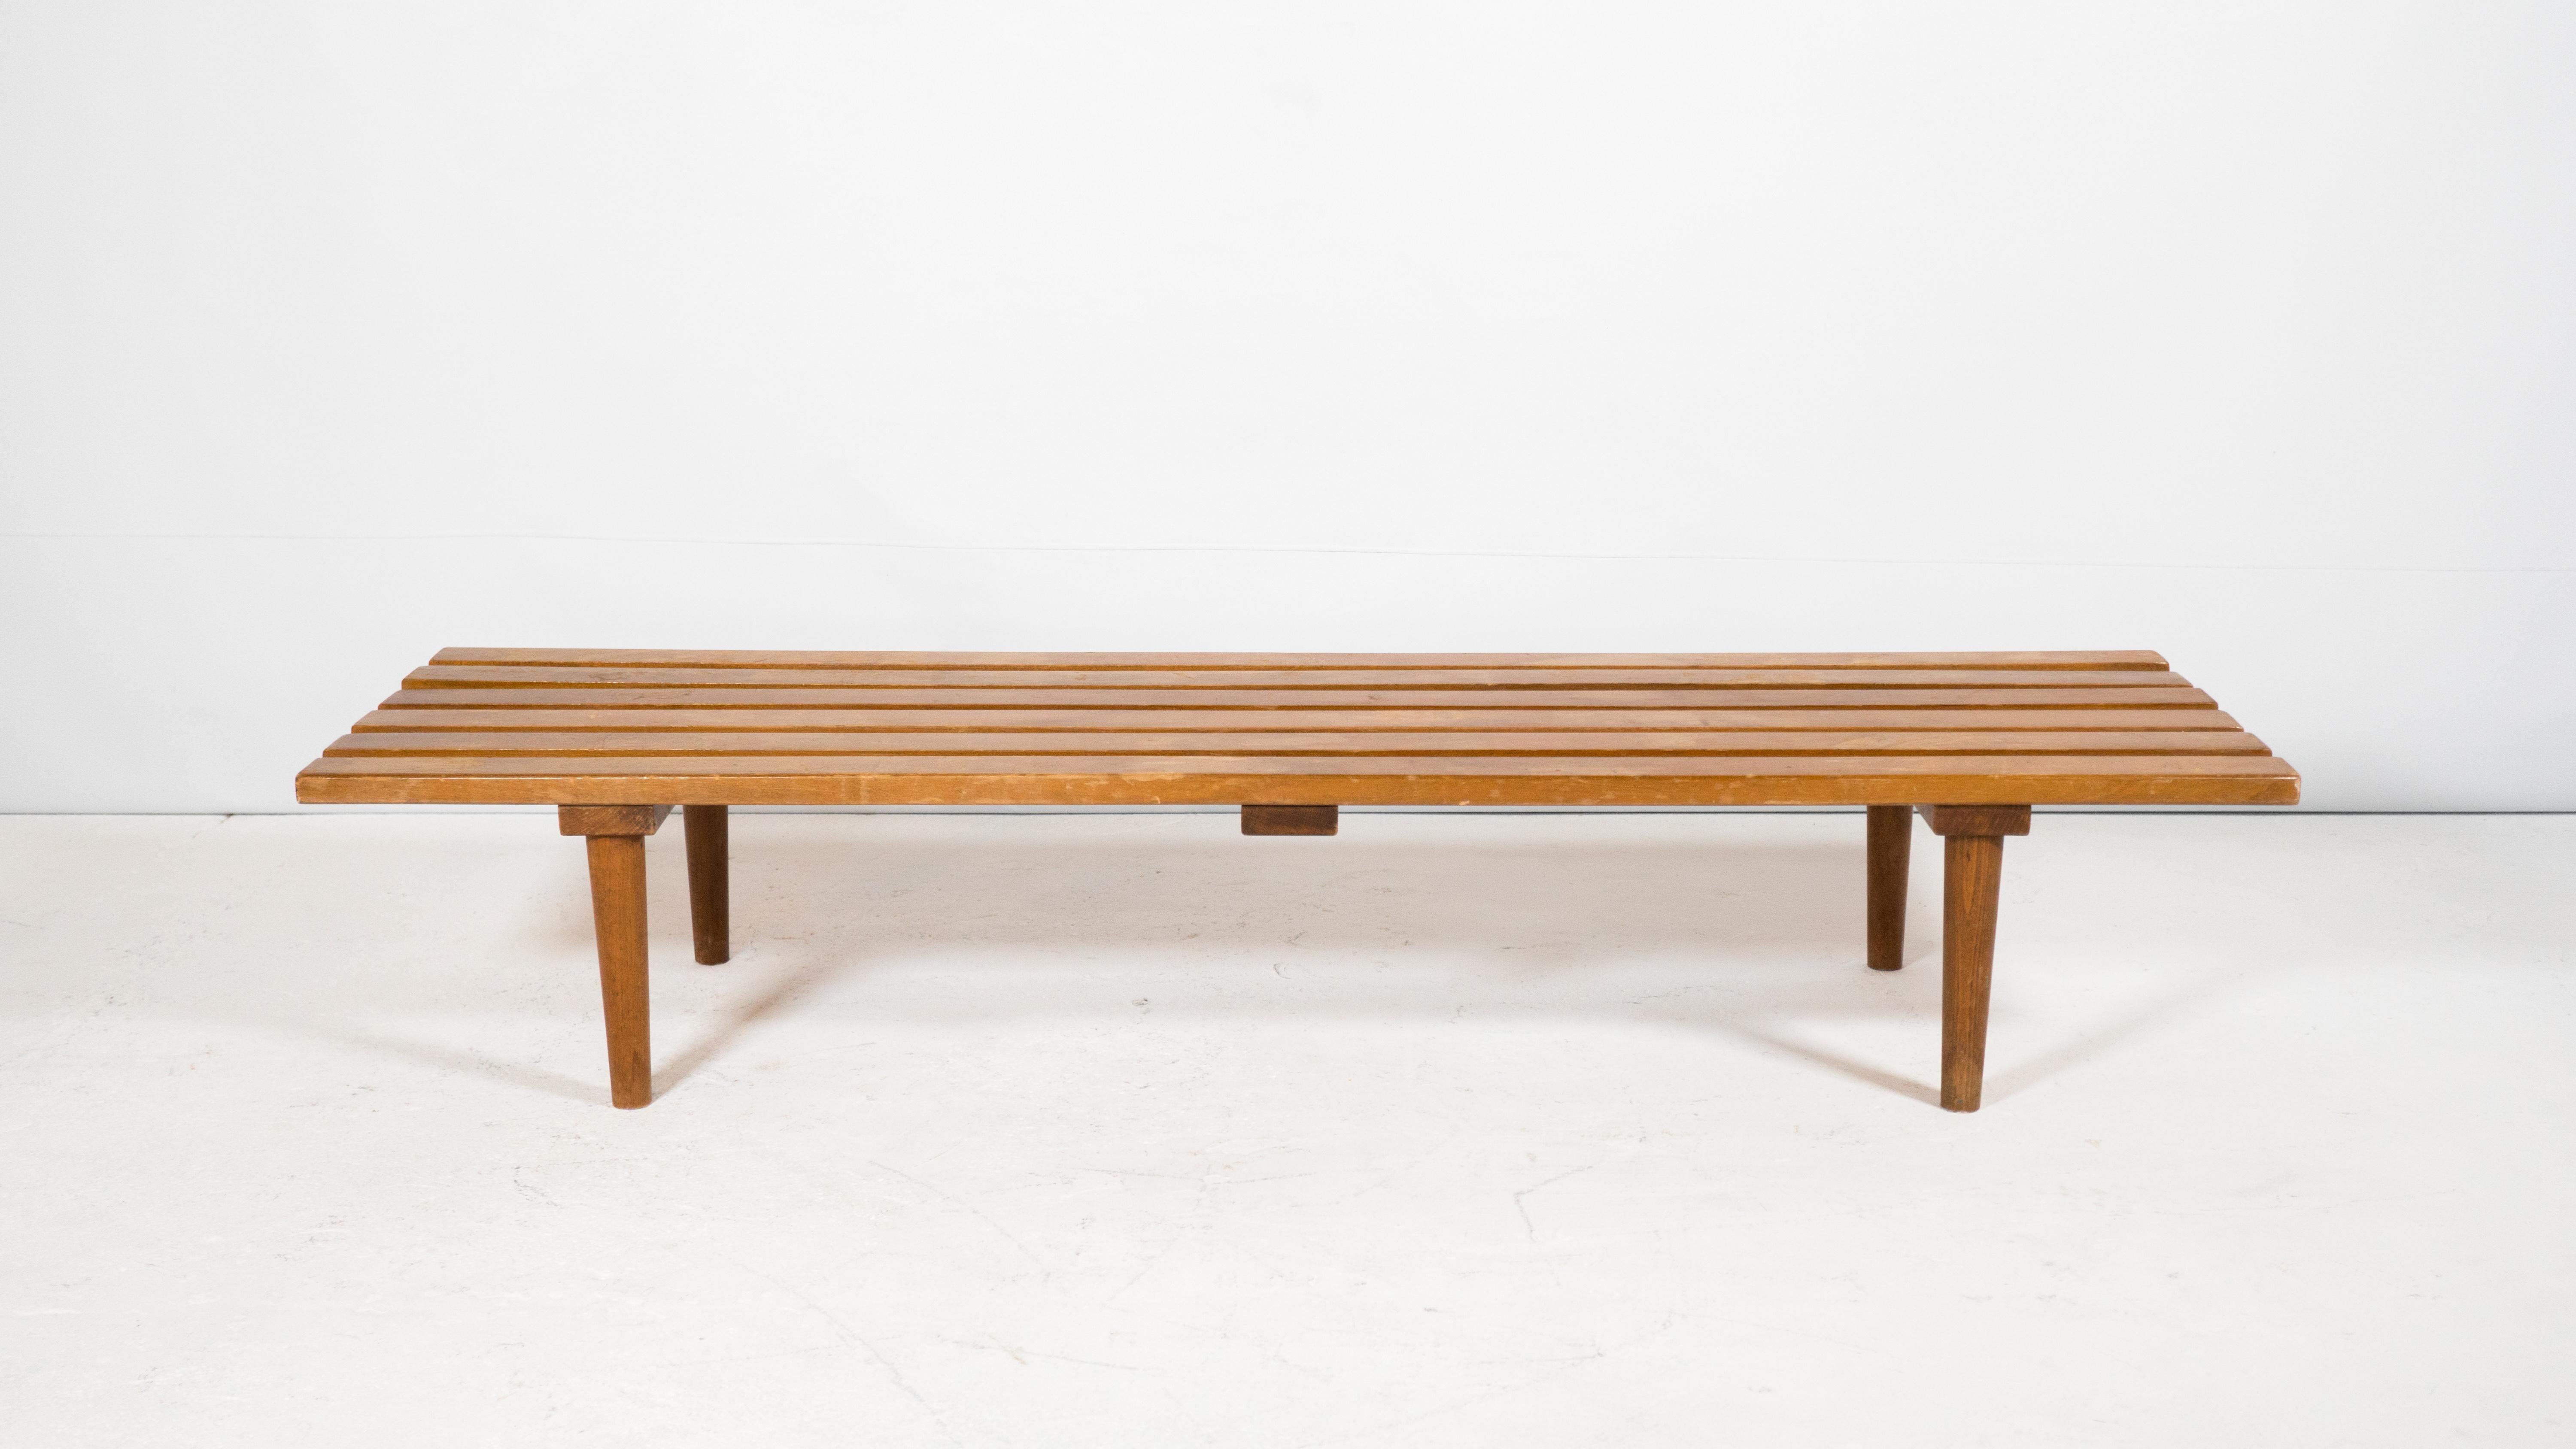 Mid Century slat wood bench or coffee table, circa 1960s. Perfect size, long at 5ft, but balanced with a low profile 11 inch height. Constructed of thick wood slats creating a suitable surface for a coffee table. Supported by tapered legs. Good